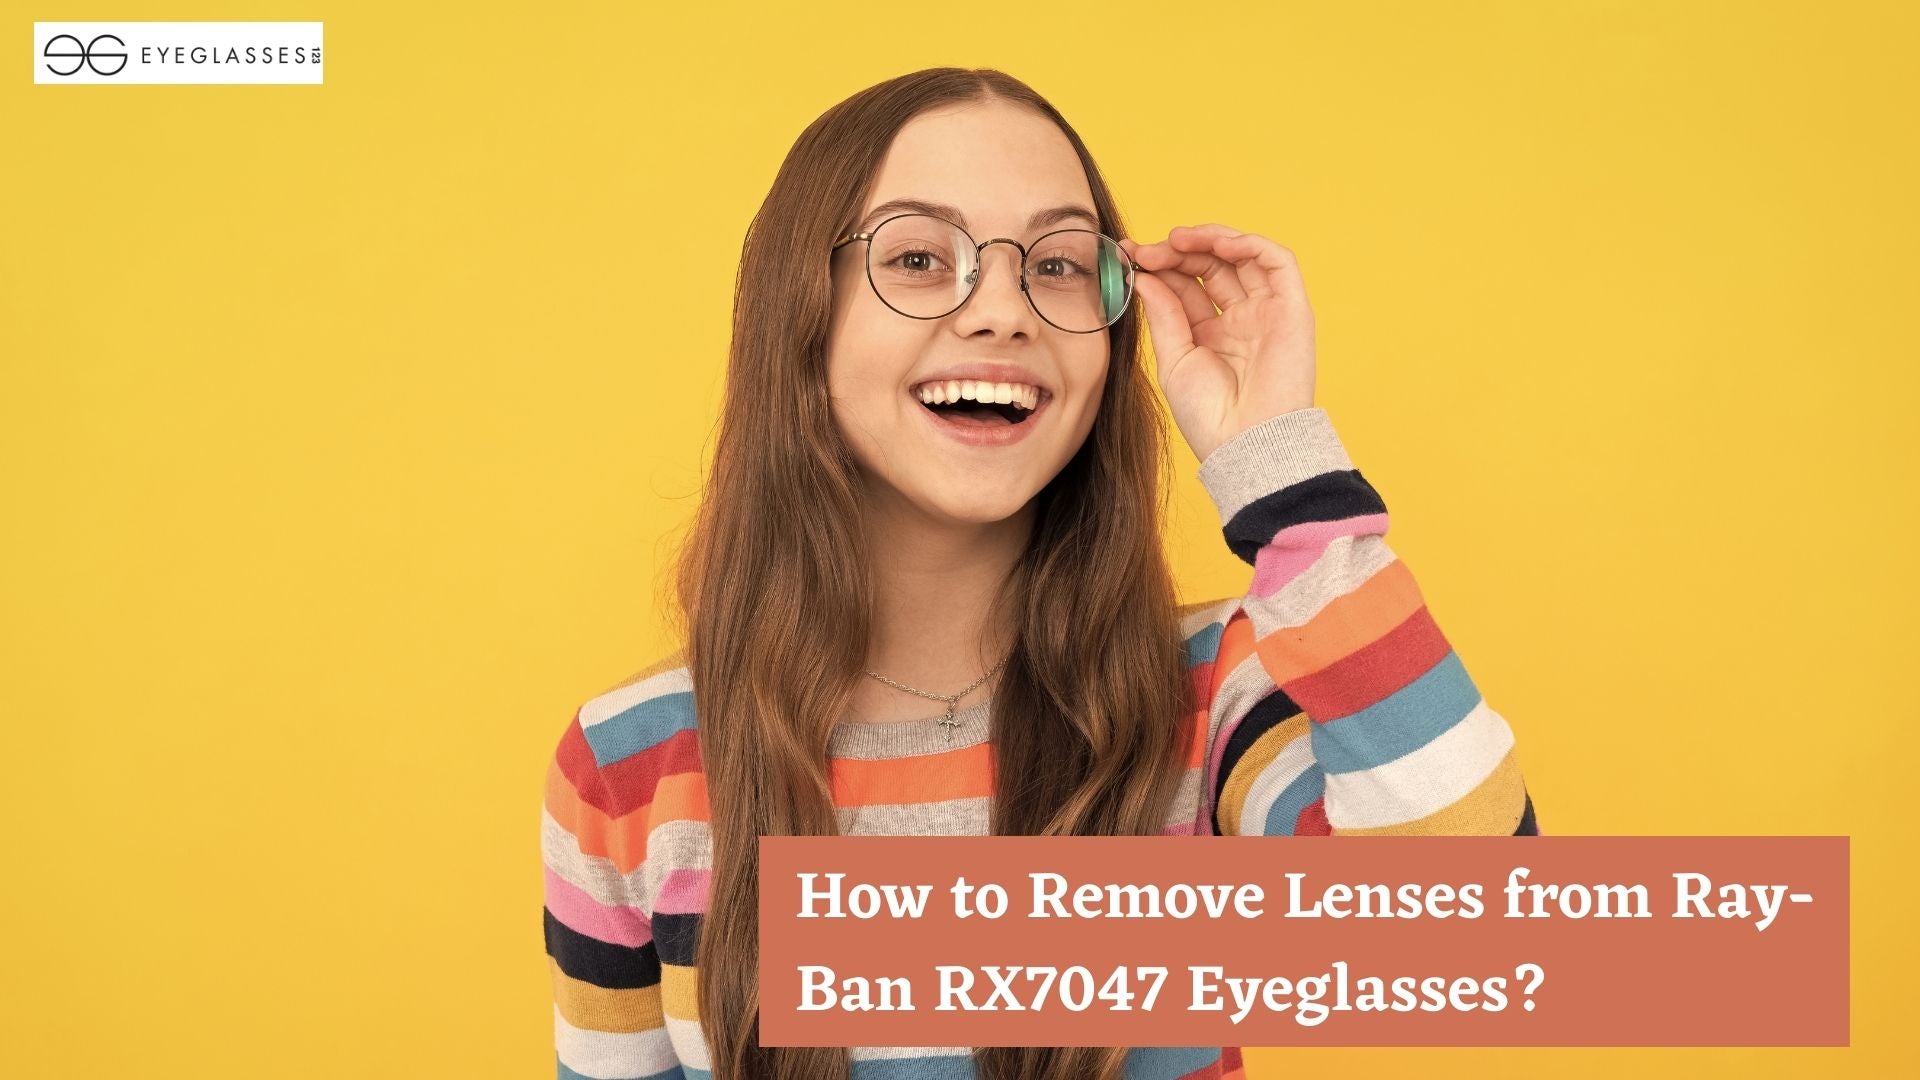 How to Remove Lenses from Ray-Ban RX7047 Eyeglasses?